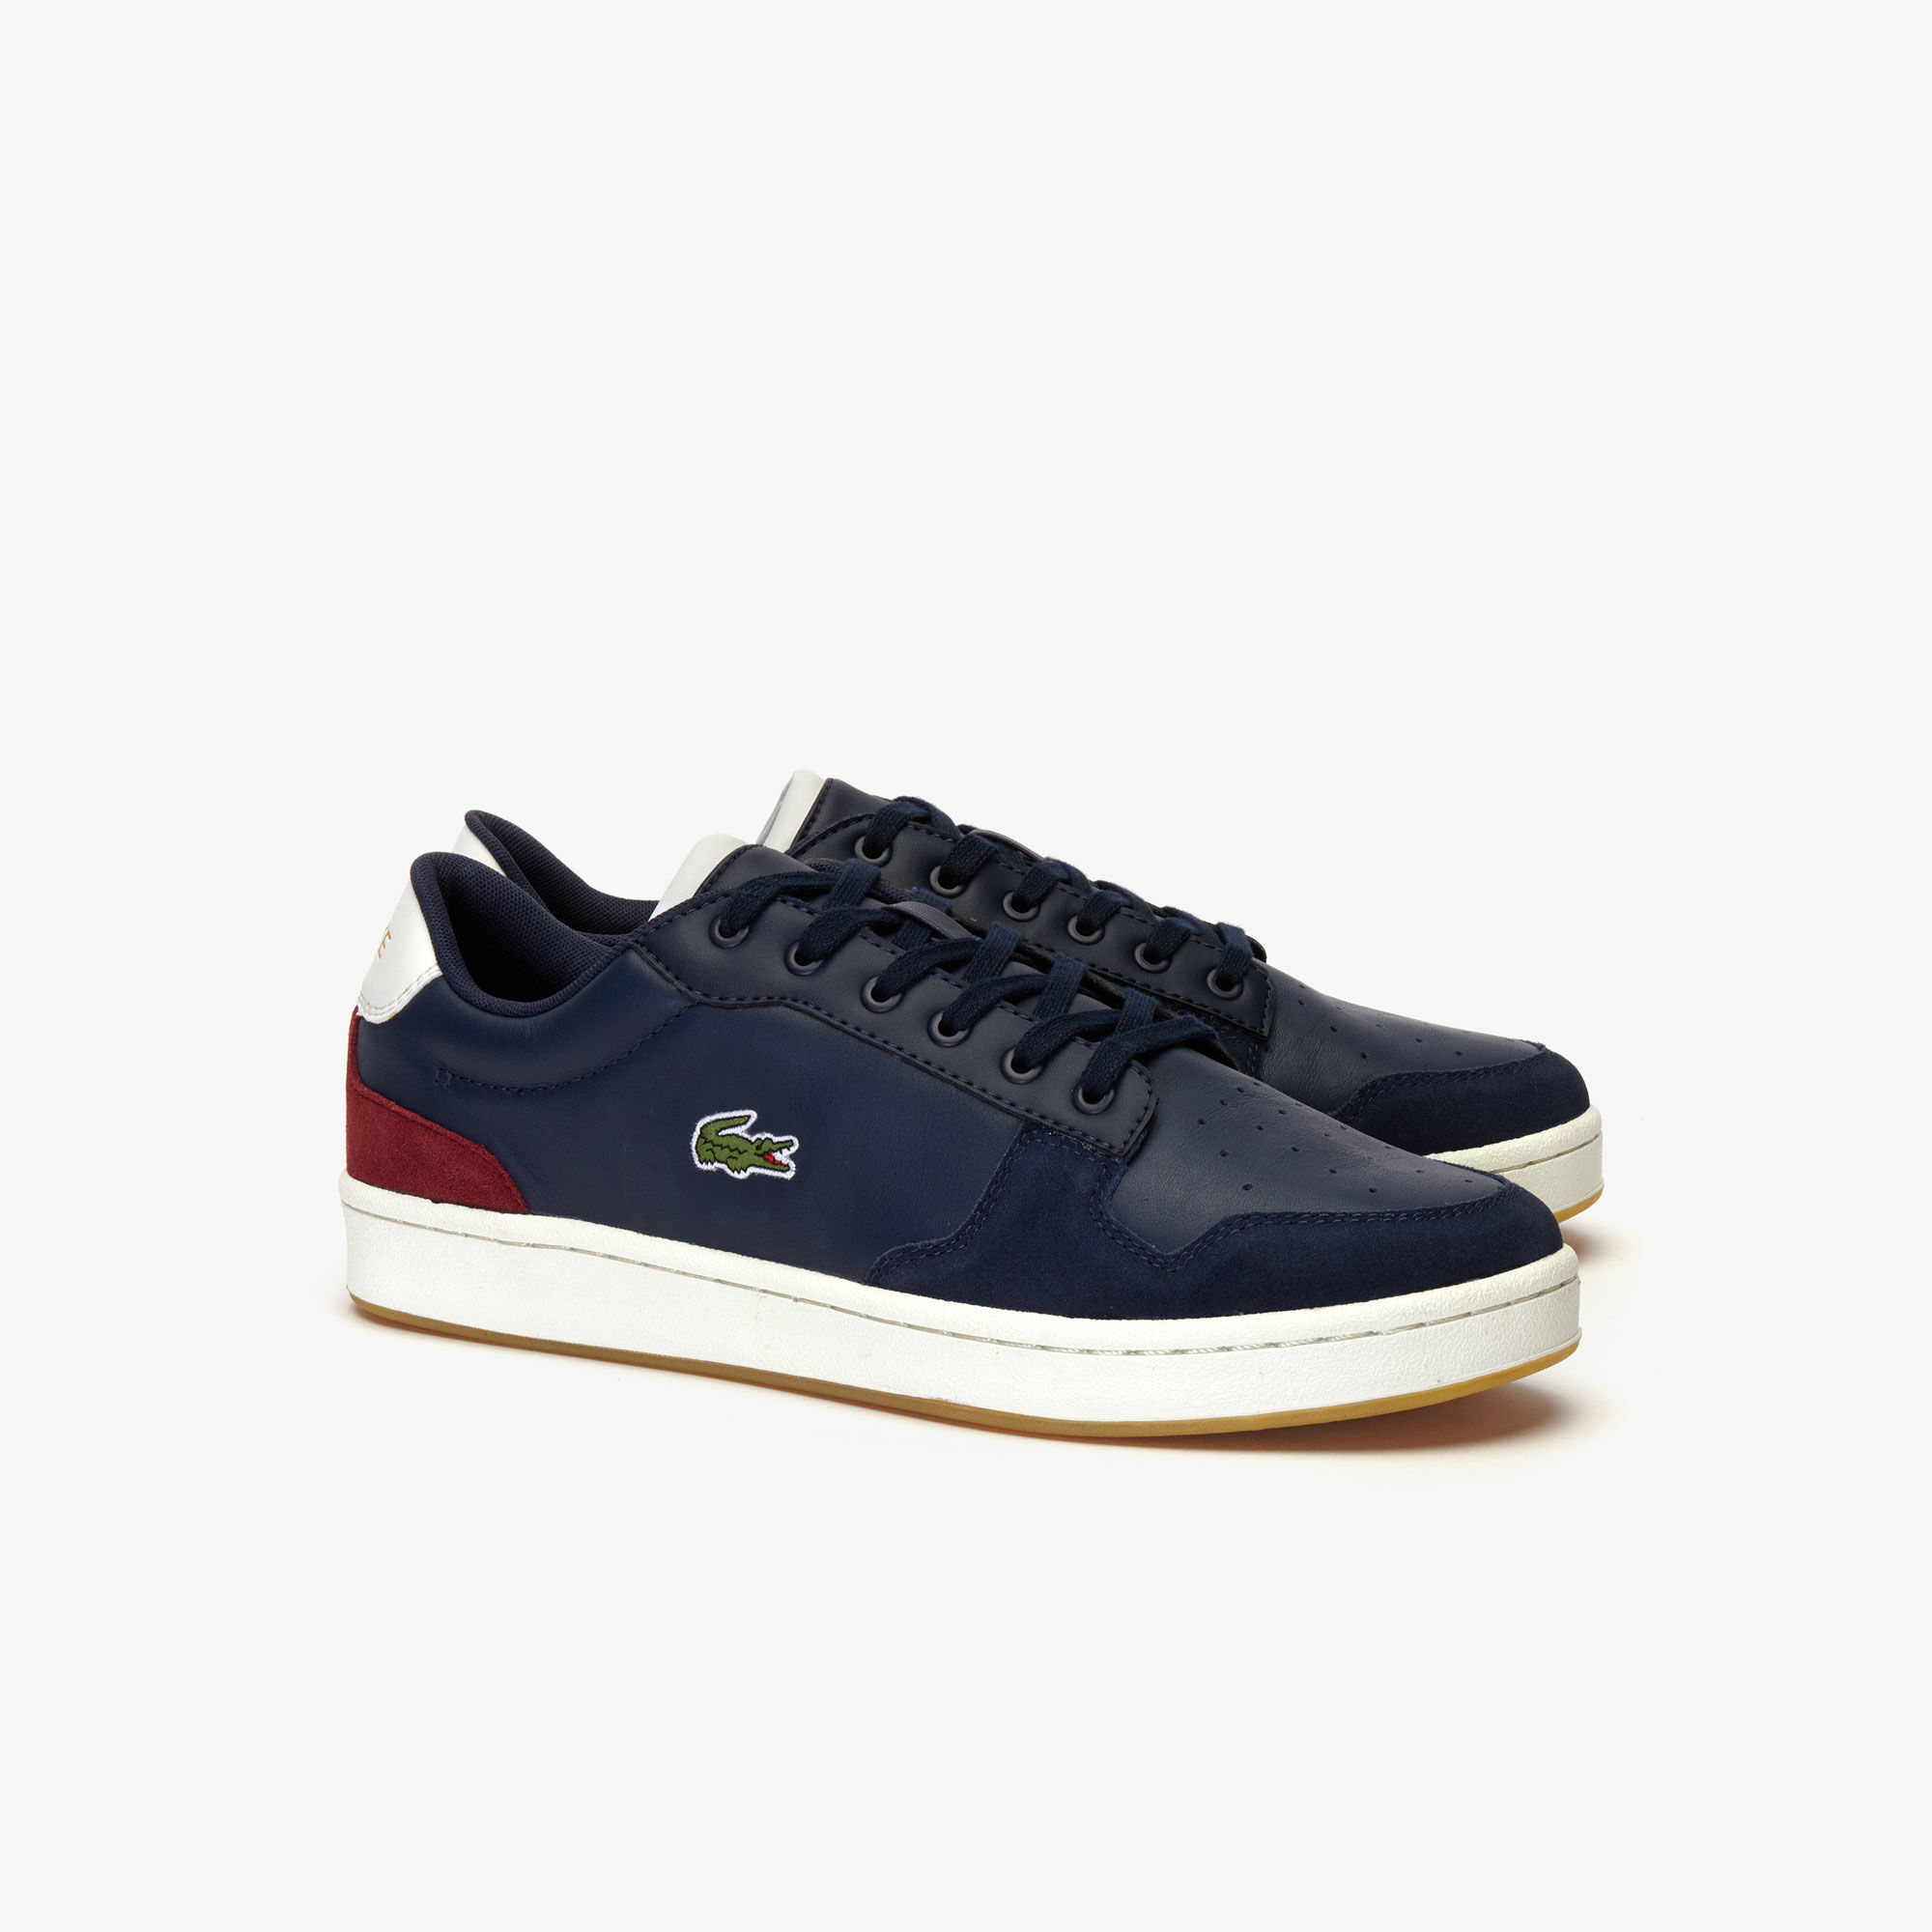 Men's Masters Cup Tricolore Trainers